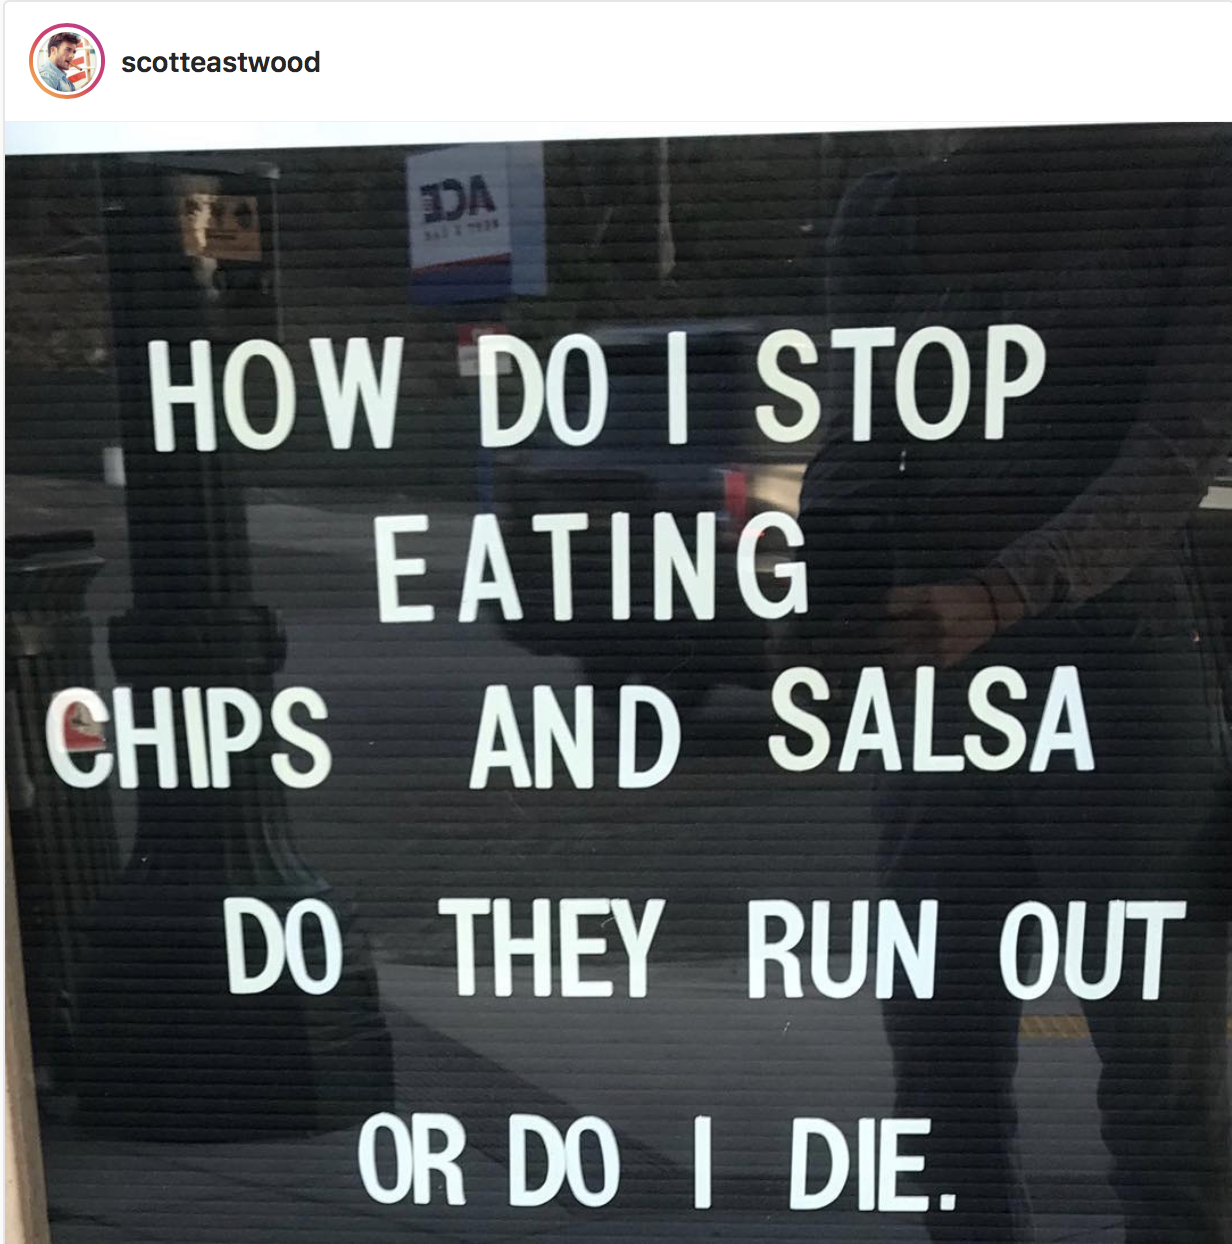 display device - scotteastwood Da How Do I Stop Eating Chips And Salsa Do They Run Out Or Do I Die.